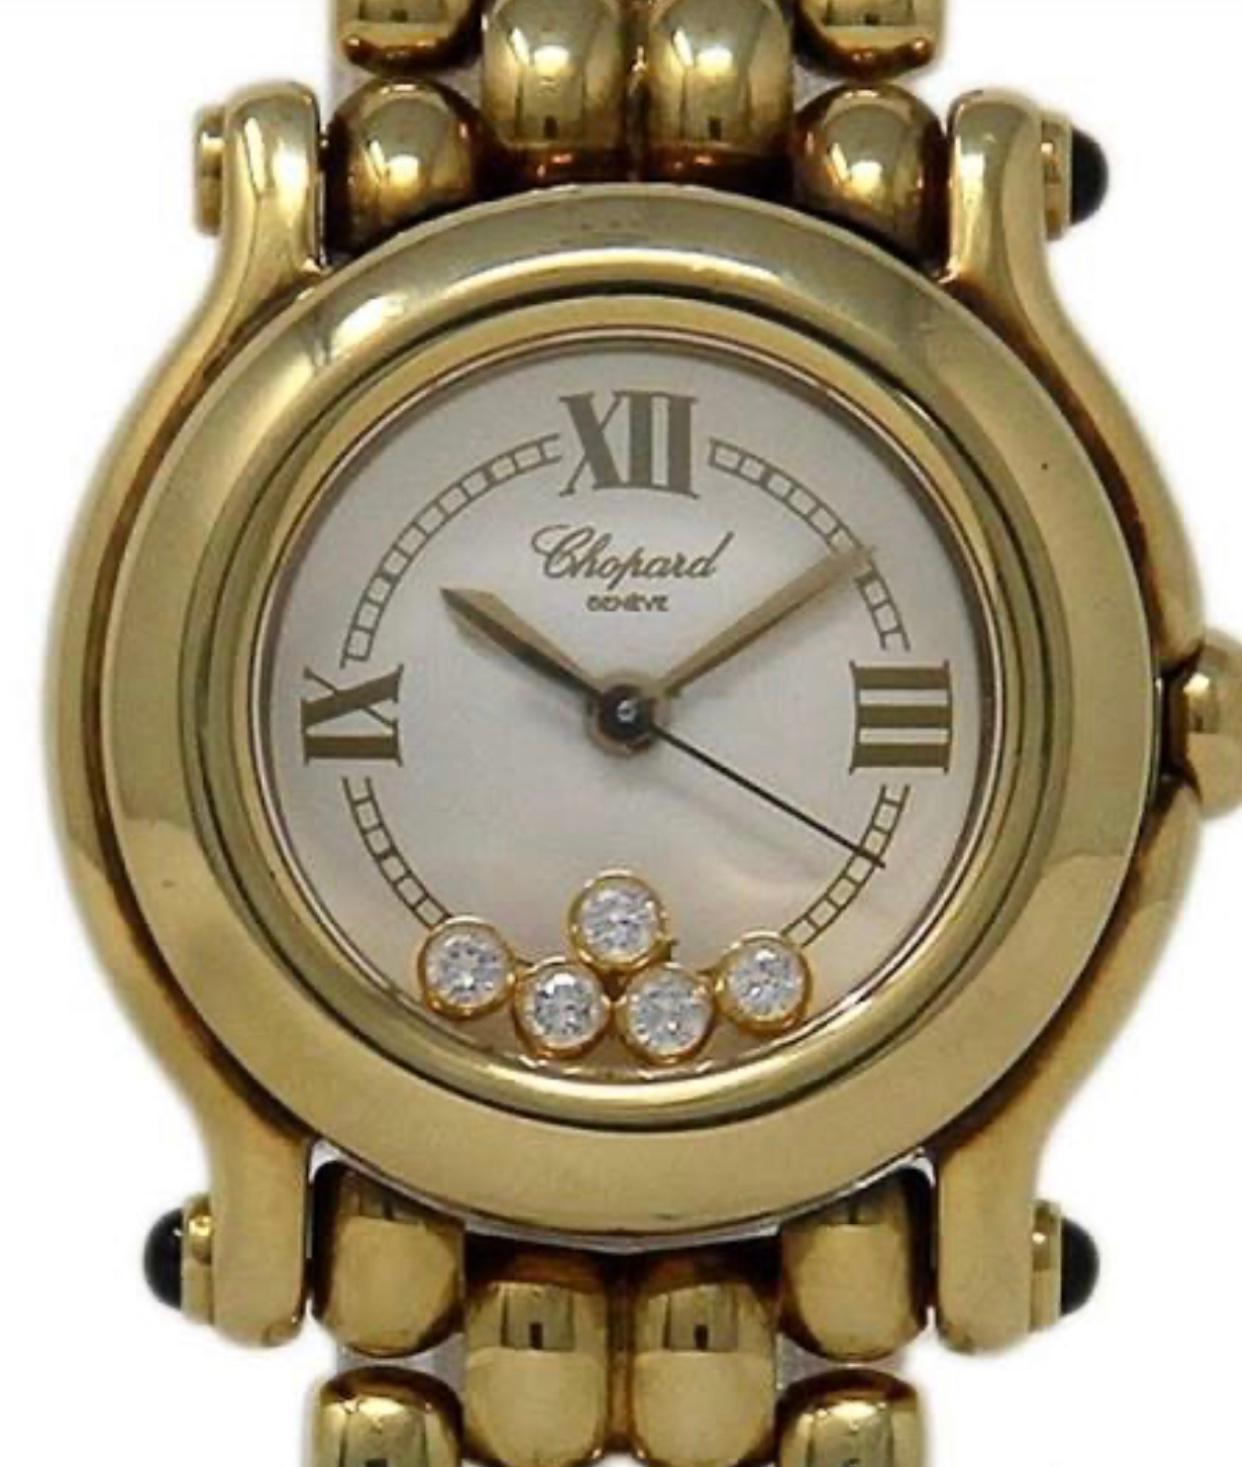 Chopard Happy Sport 277-6150-23 18 Kt Yellow Gold 115 Grams 5 Floating Diamonds
Swiss Made
Model Name:Happy Sport
- White Dial
- 5 Floating Diamonds Inside Dial
- Diamonds Set on Bezel
- 5 Blue Sapphire Cabochon Crown
- Battery Operated Quartz